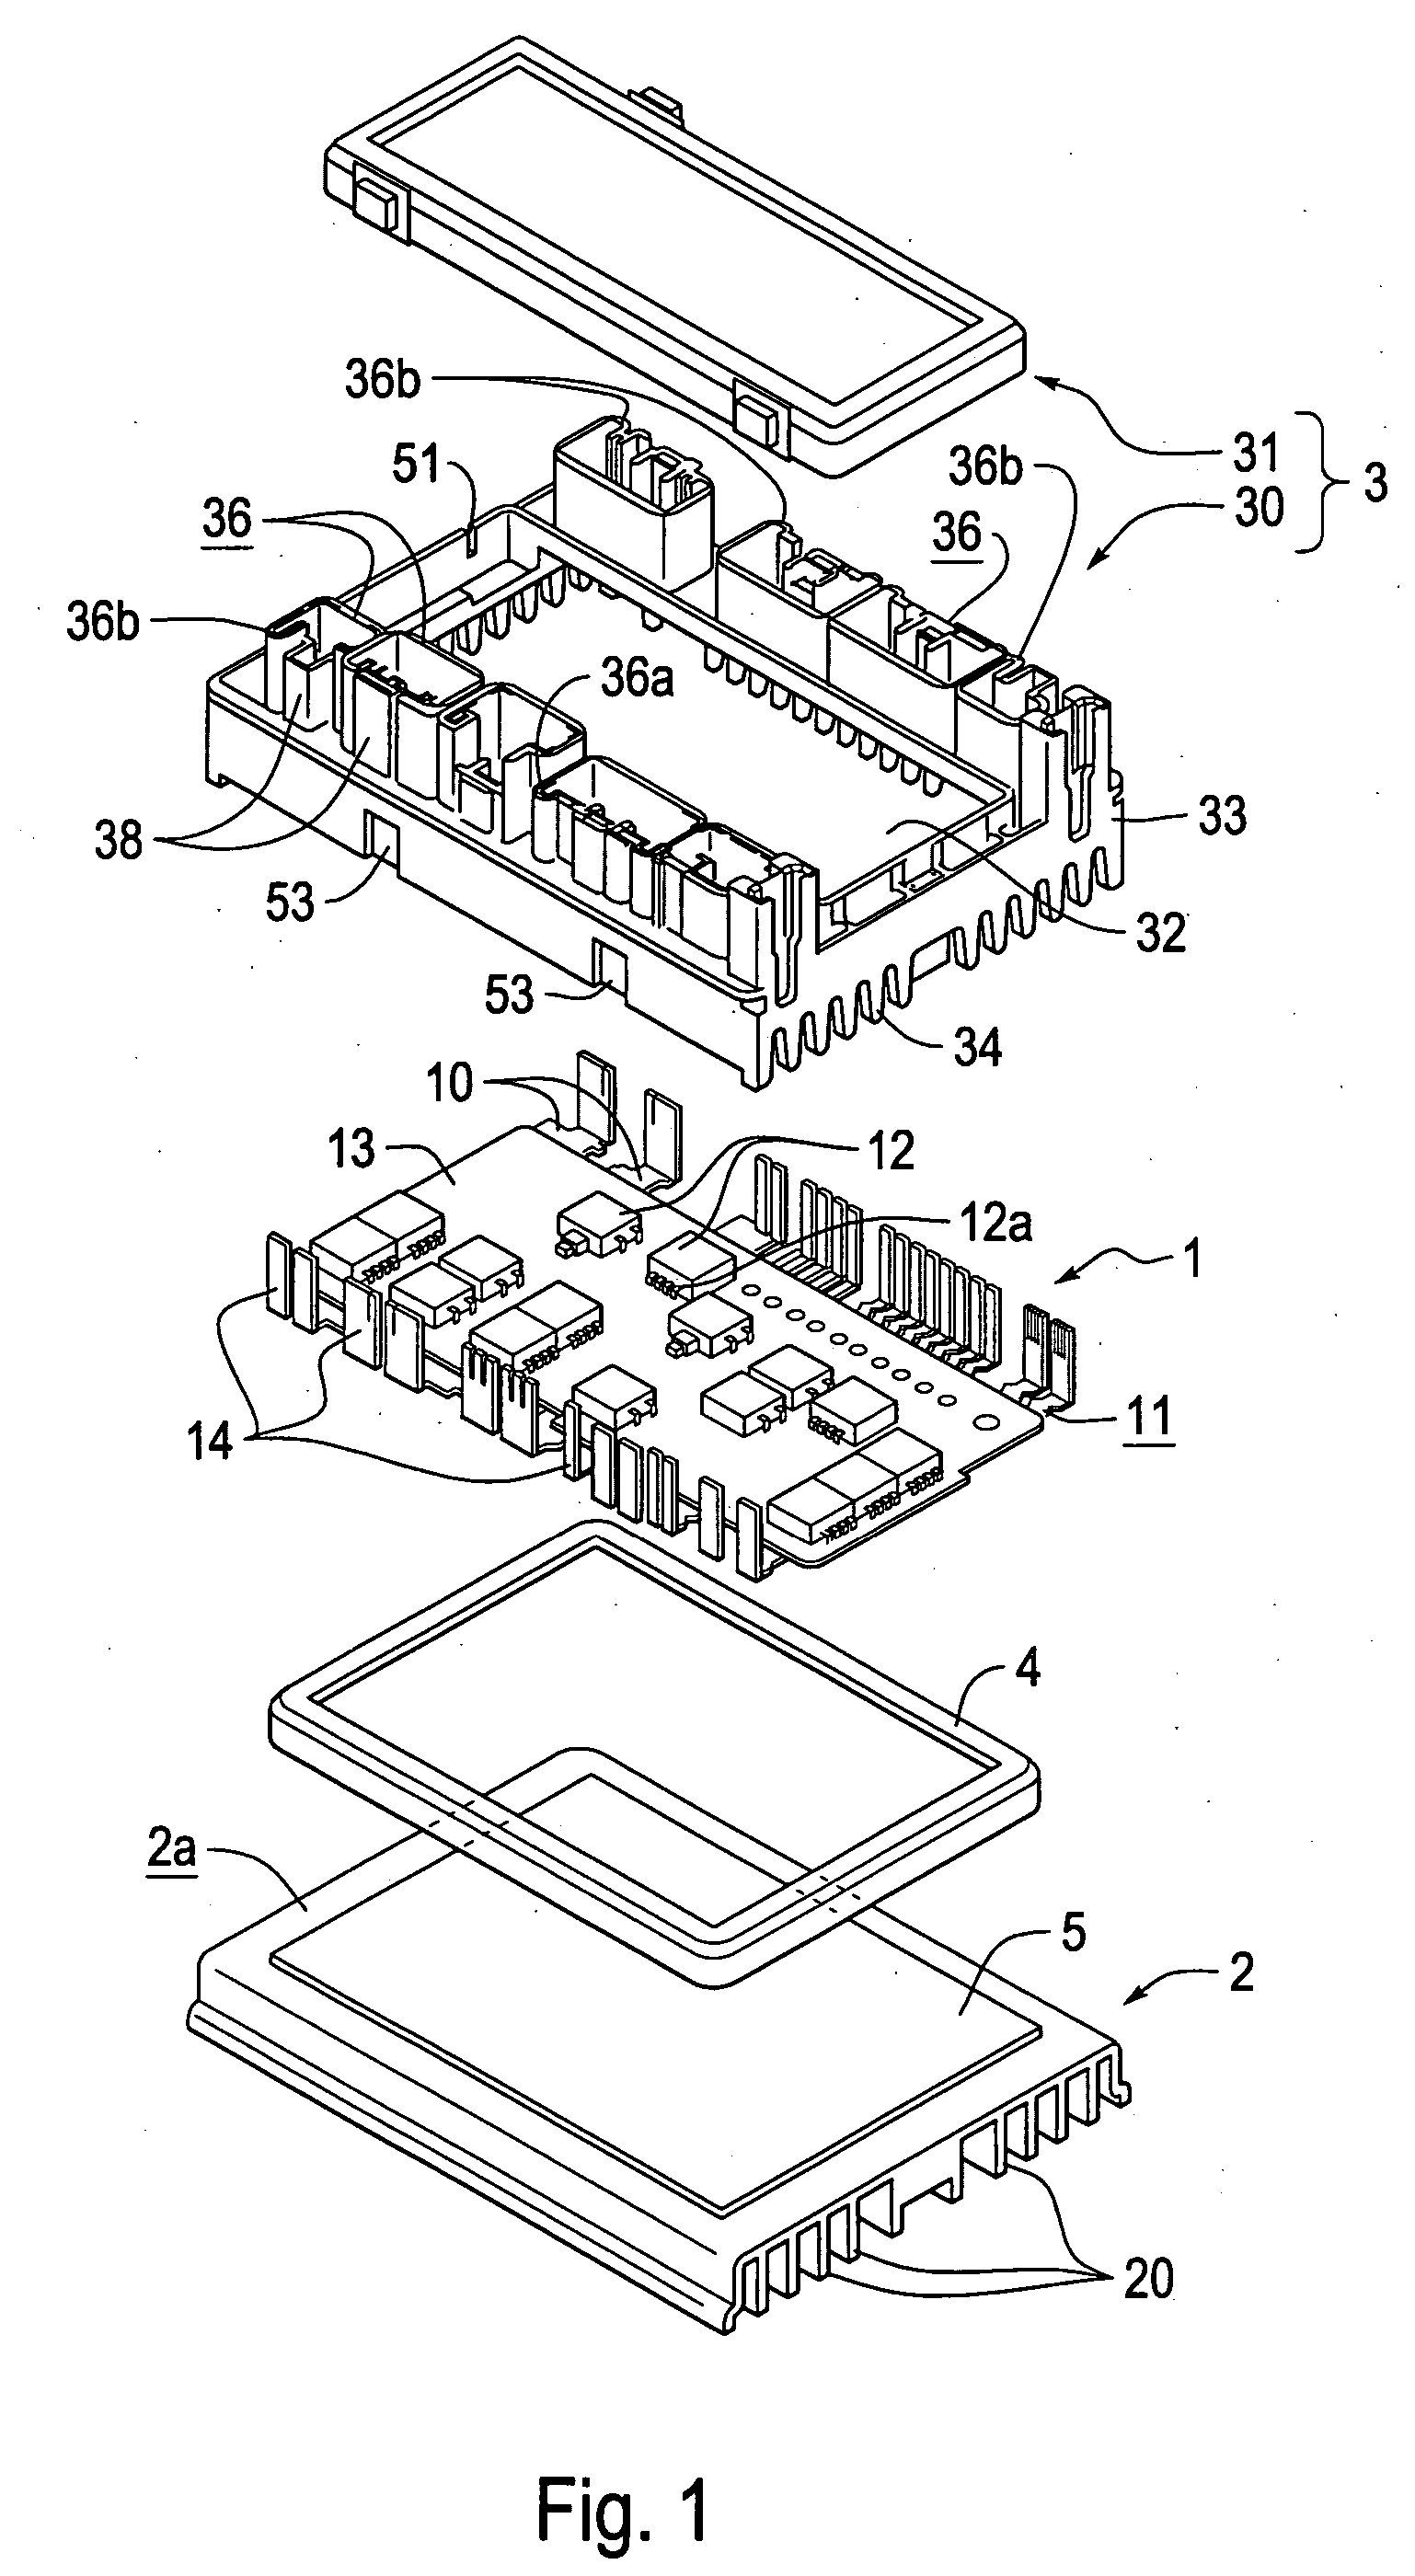 Casing unit for circuit assembly and method for producing the circuit assembly